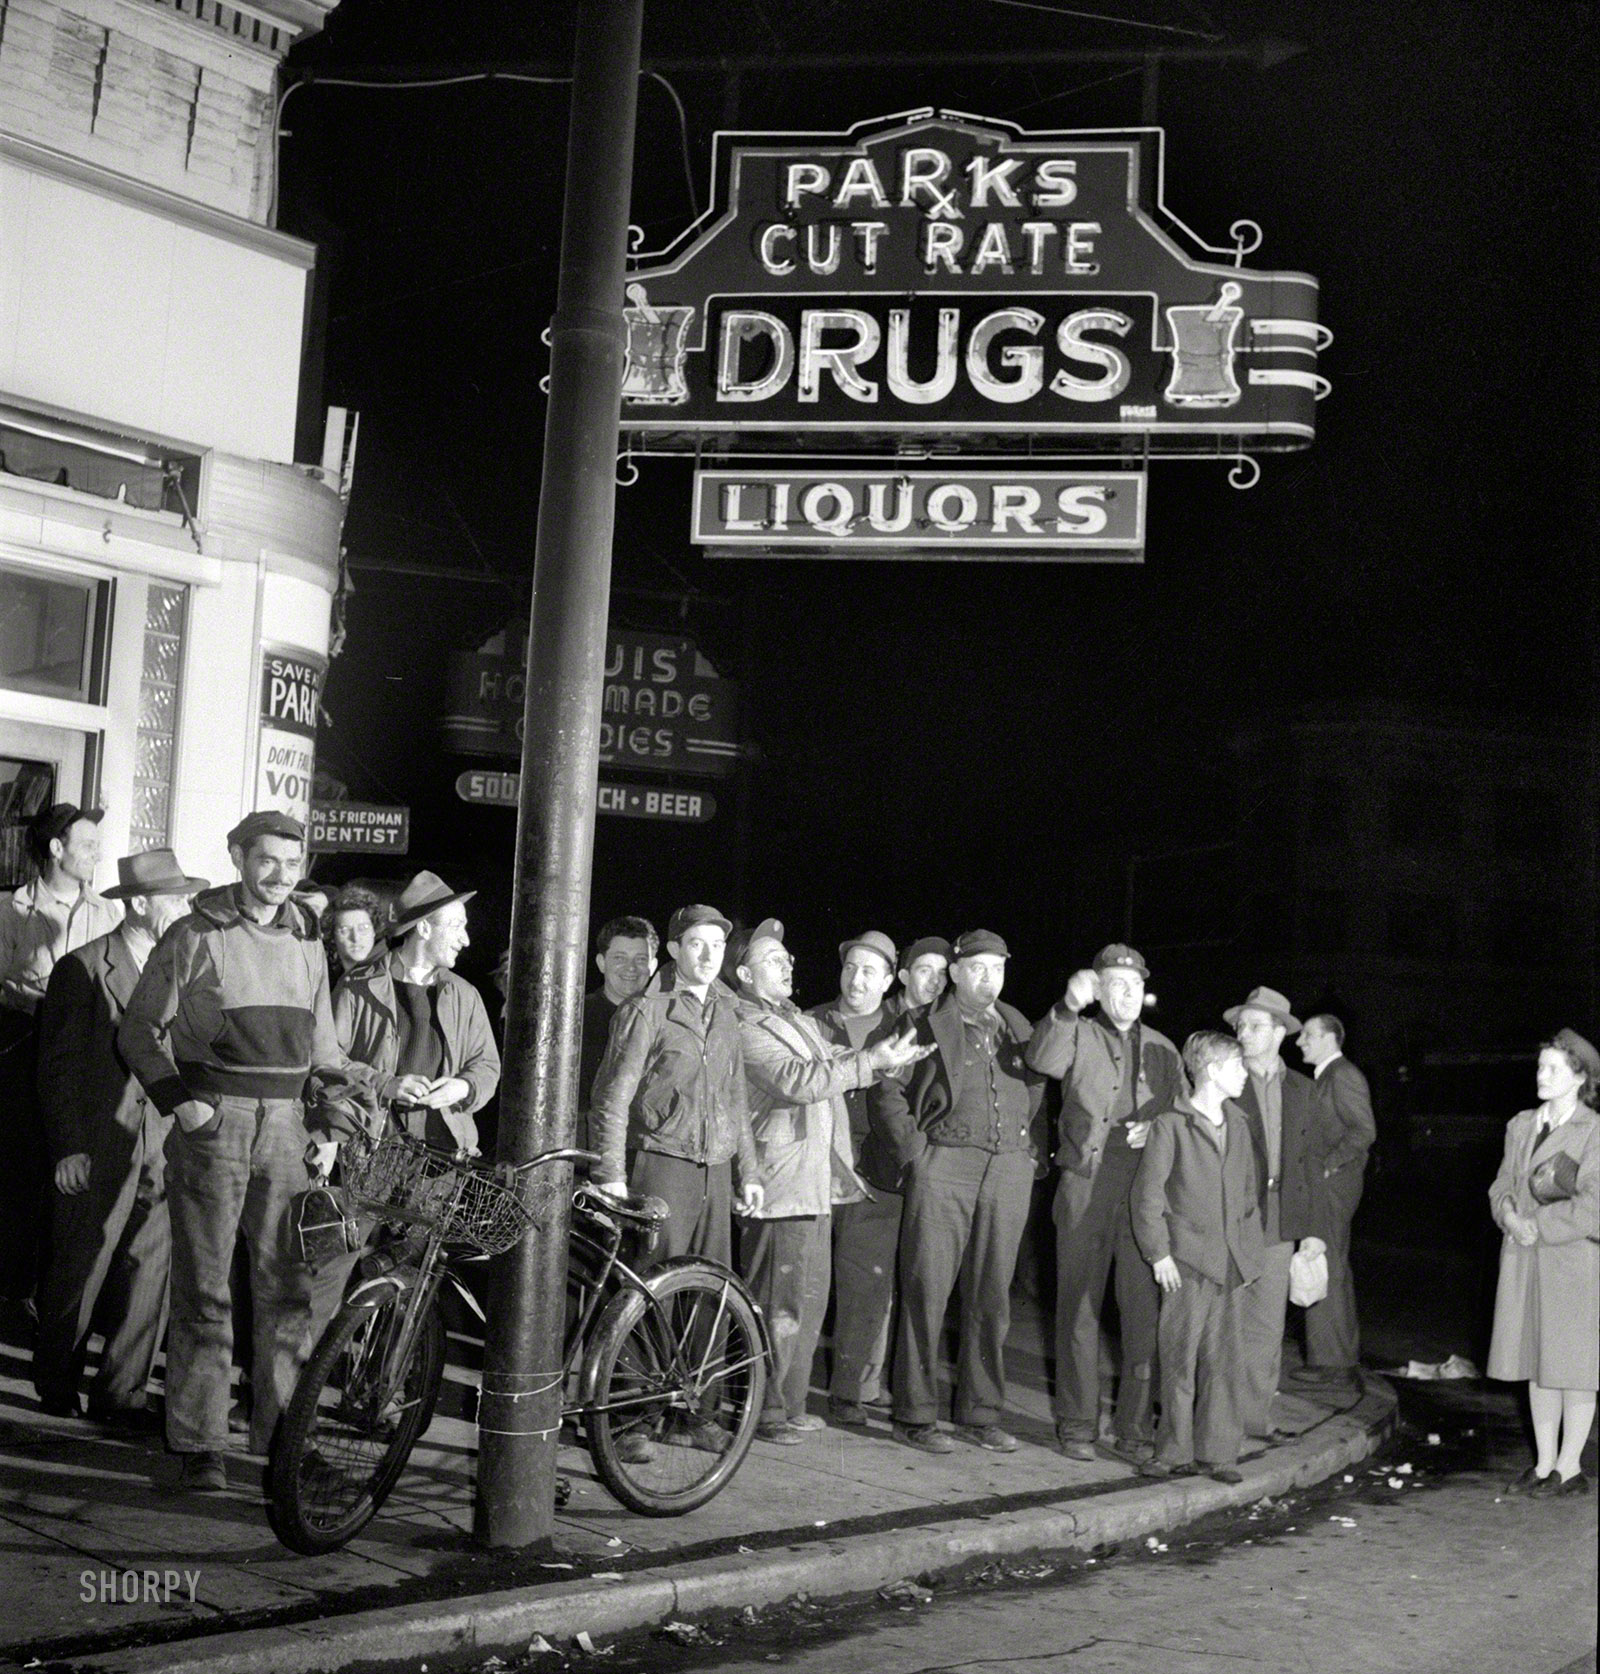 April 1943. "Baltimore, Maryland. Third shift workers waiting on a street corner to be picked up by car pools around midnight." Last seen at the lunch counter. Photo by Marjory Collins for the Office of War Information. View full size.